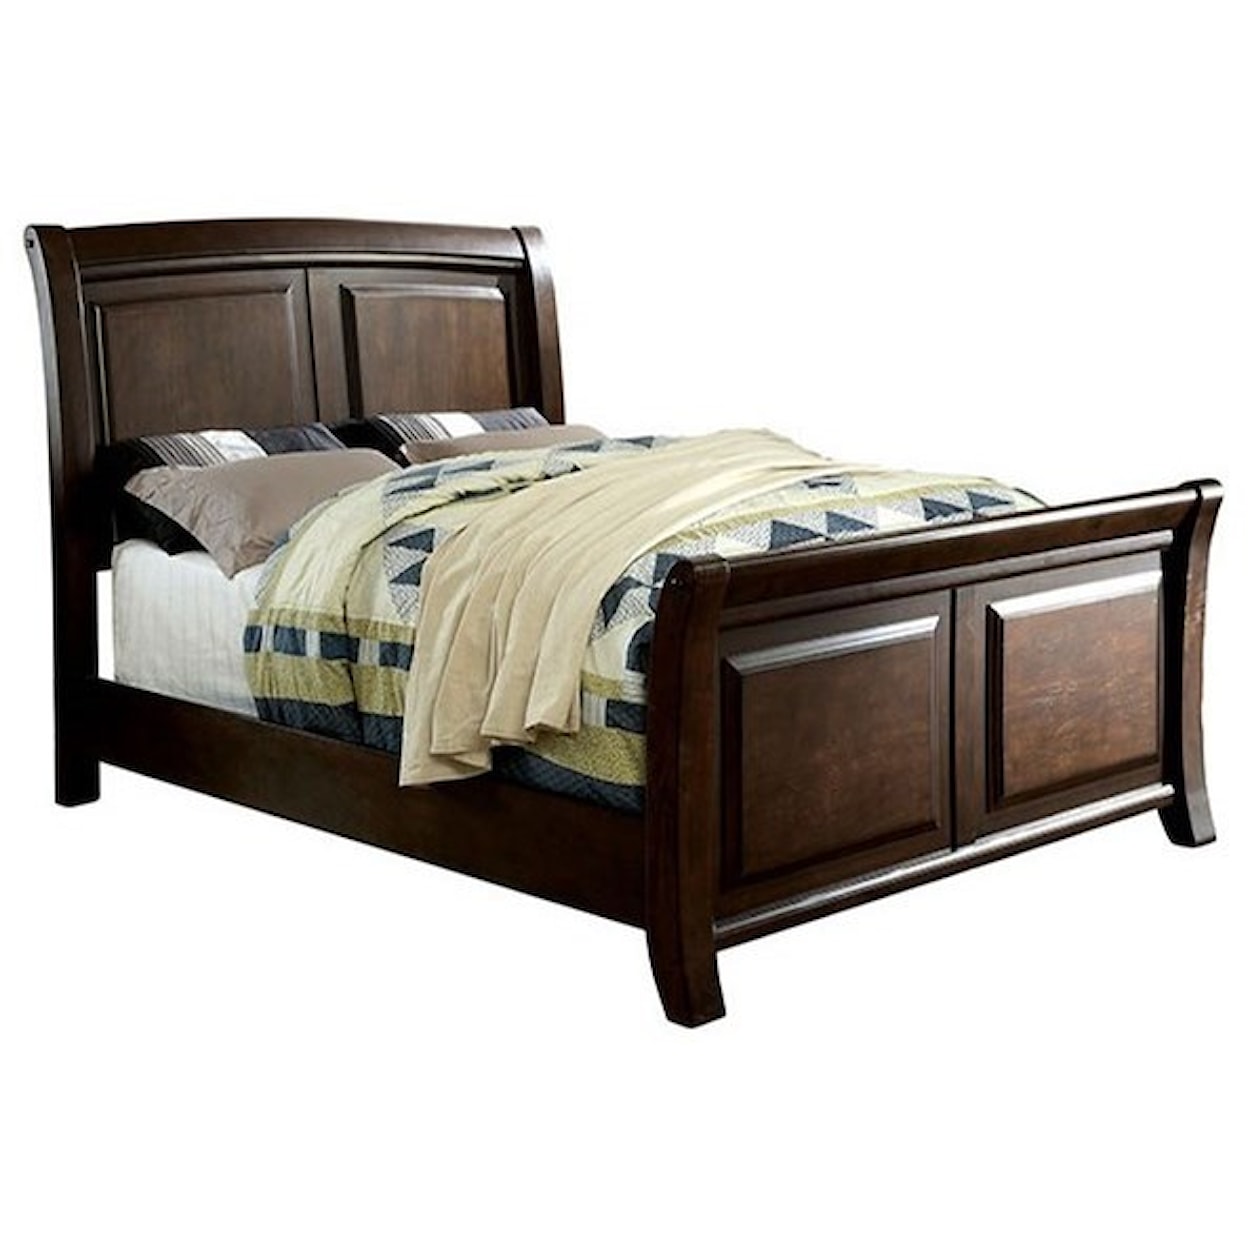 Furniture of America Litchville King Sleigh Bed